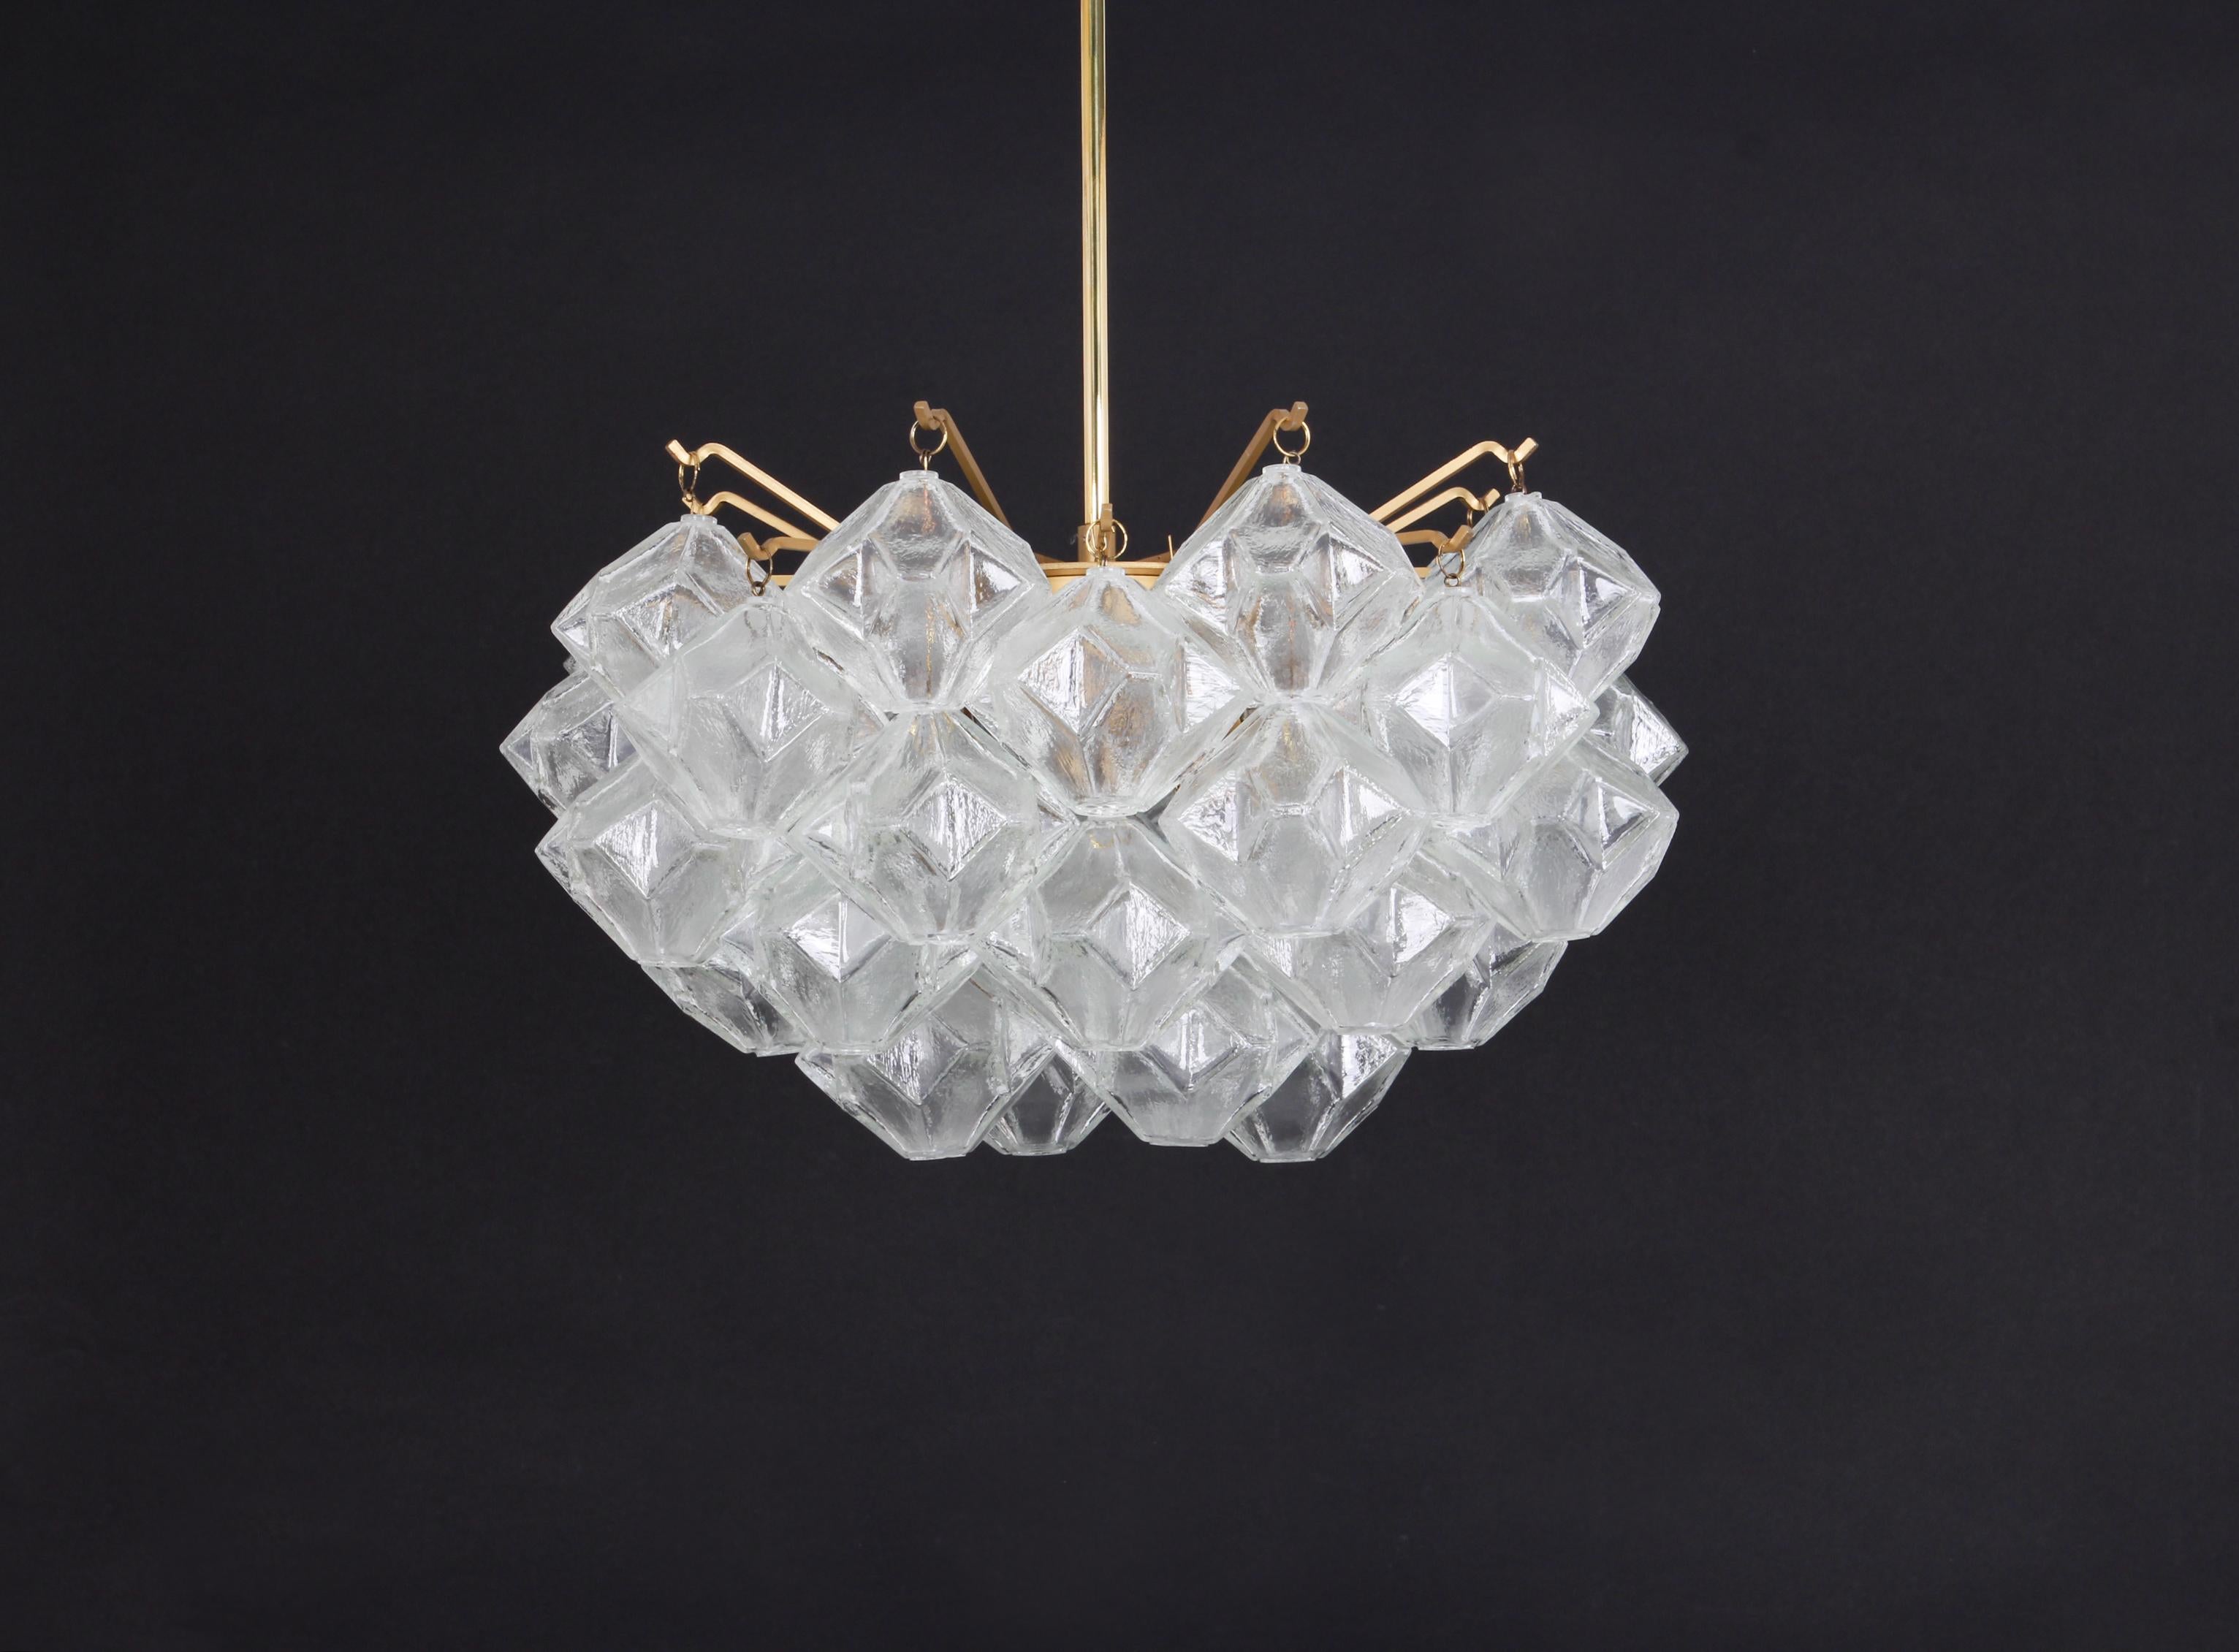 Wonderful rare chandelier with onion shaped glasses. 31 hand blown glasses suspended on gold painted metal frame and brass center rod.
Best of design from the 1960s by Kalmar, Austria. High quality of the materials.

Sockets: 4 x E27 Standard